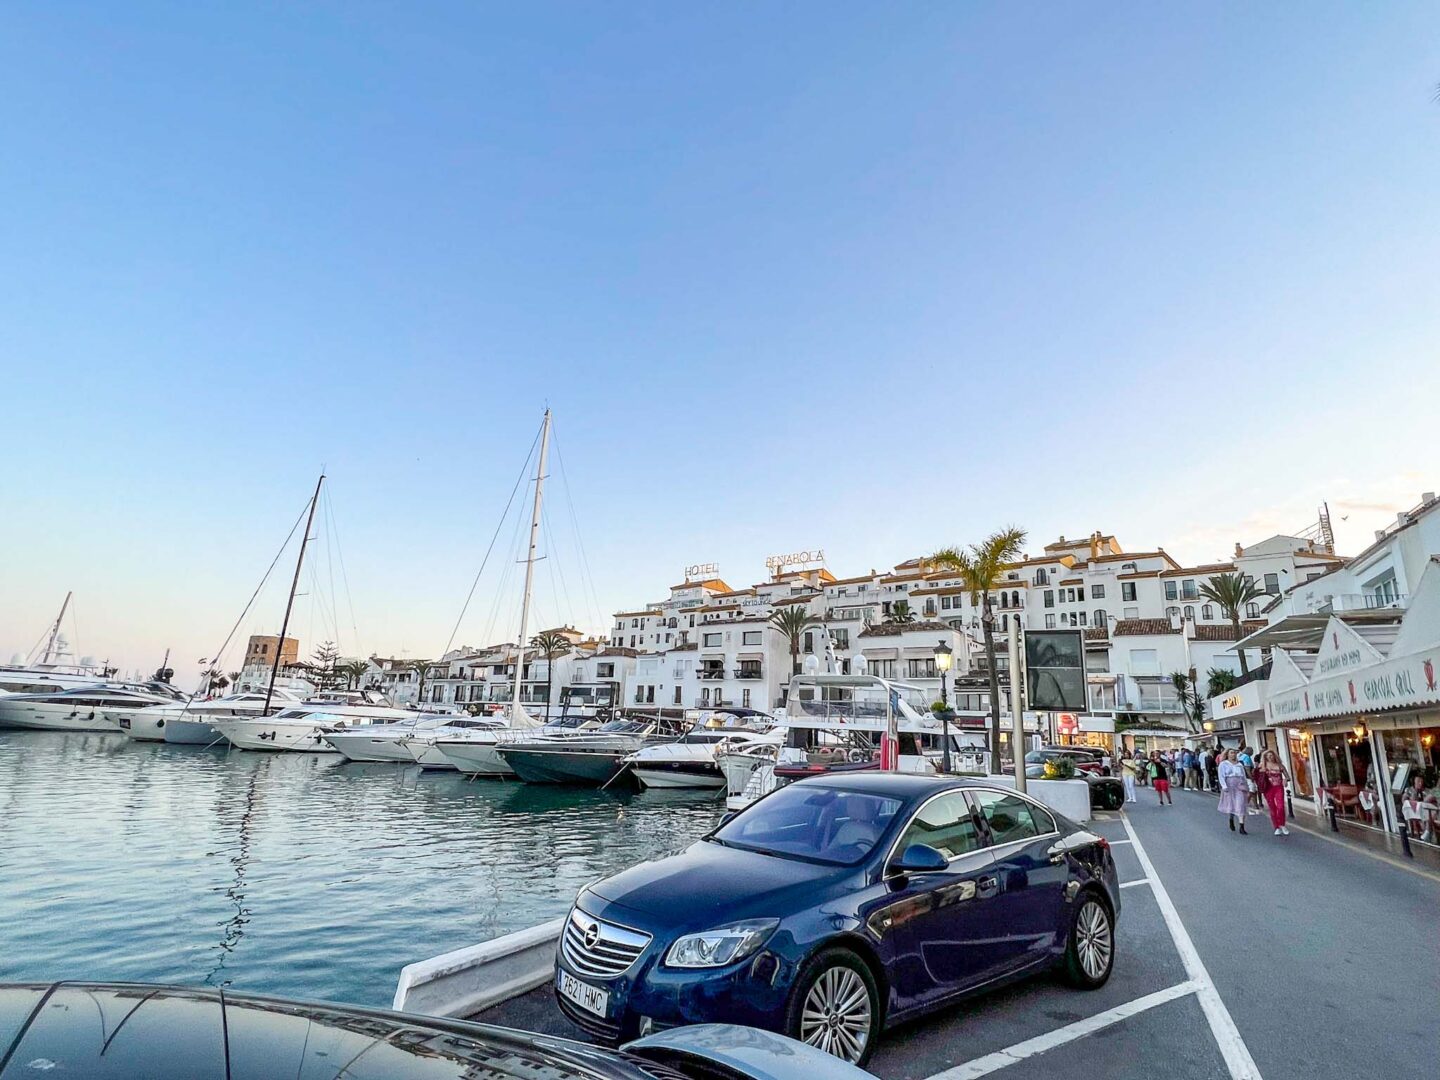 Southern Spain itinerary, Puerto Banus Harbour